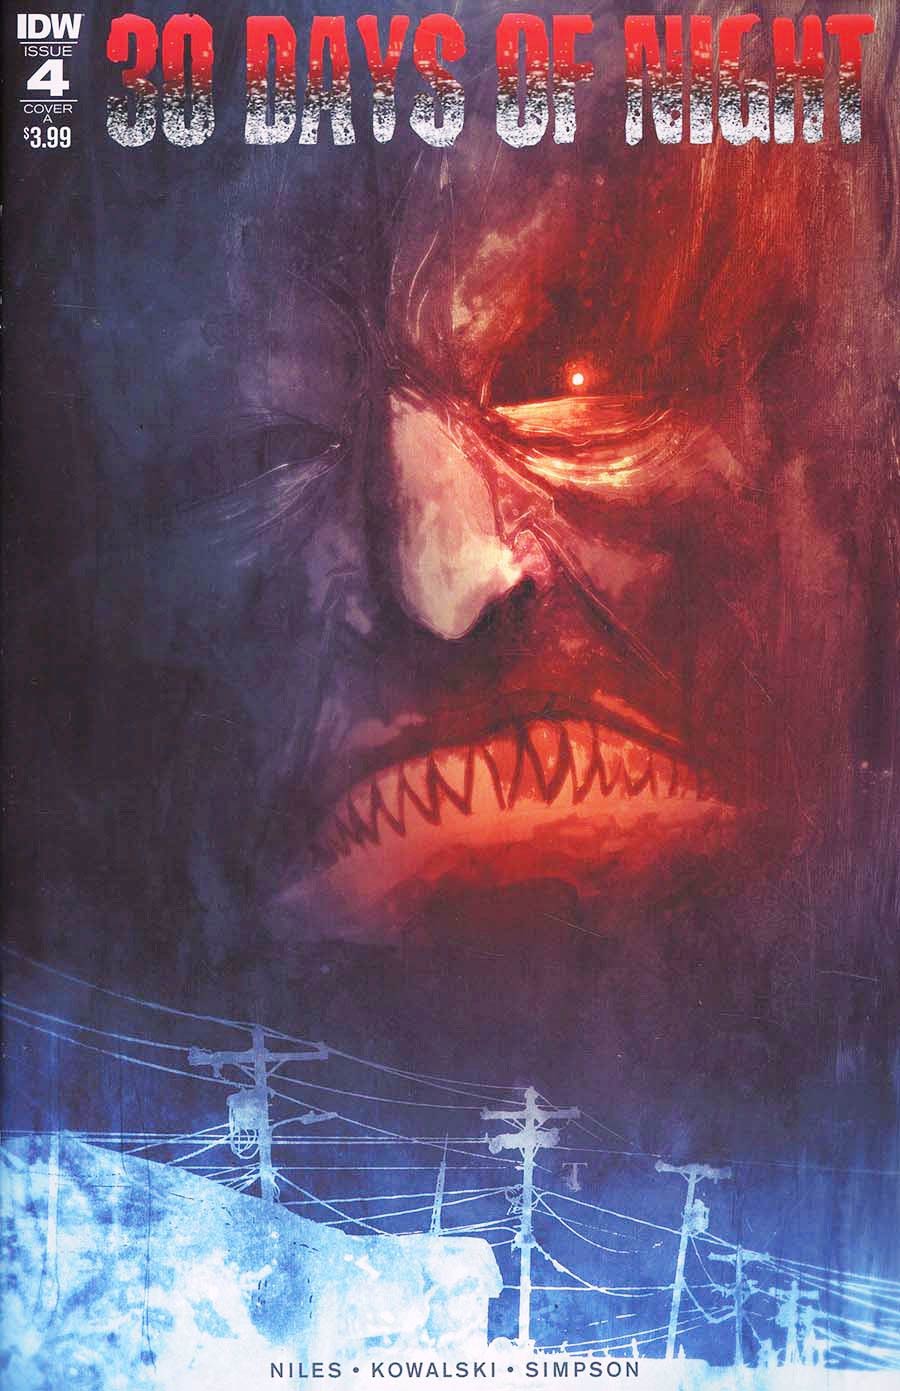 30 Days Of Night Vol 3 #4 Cover A Regular Ben Templesmith Cover